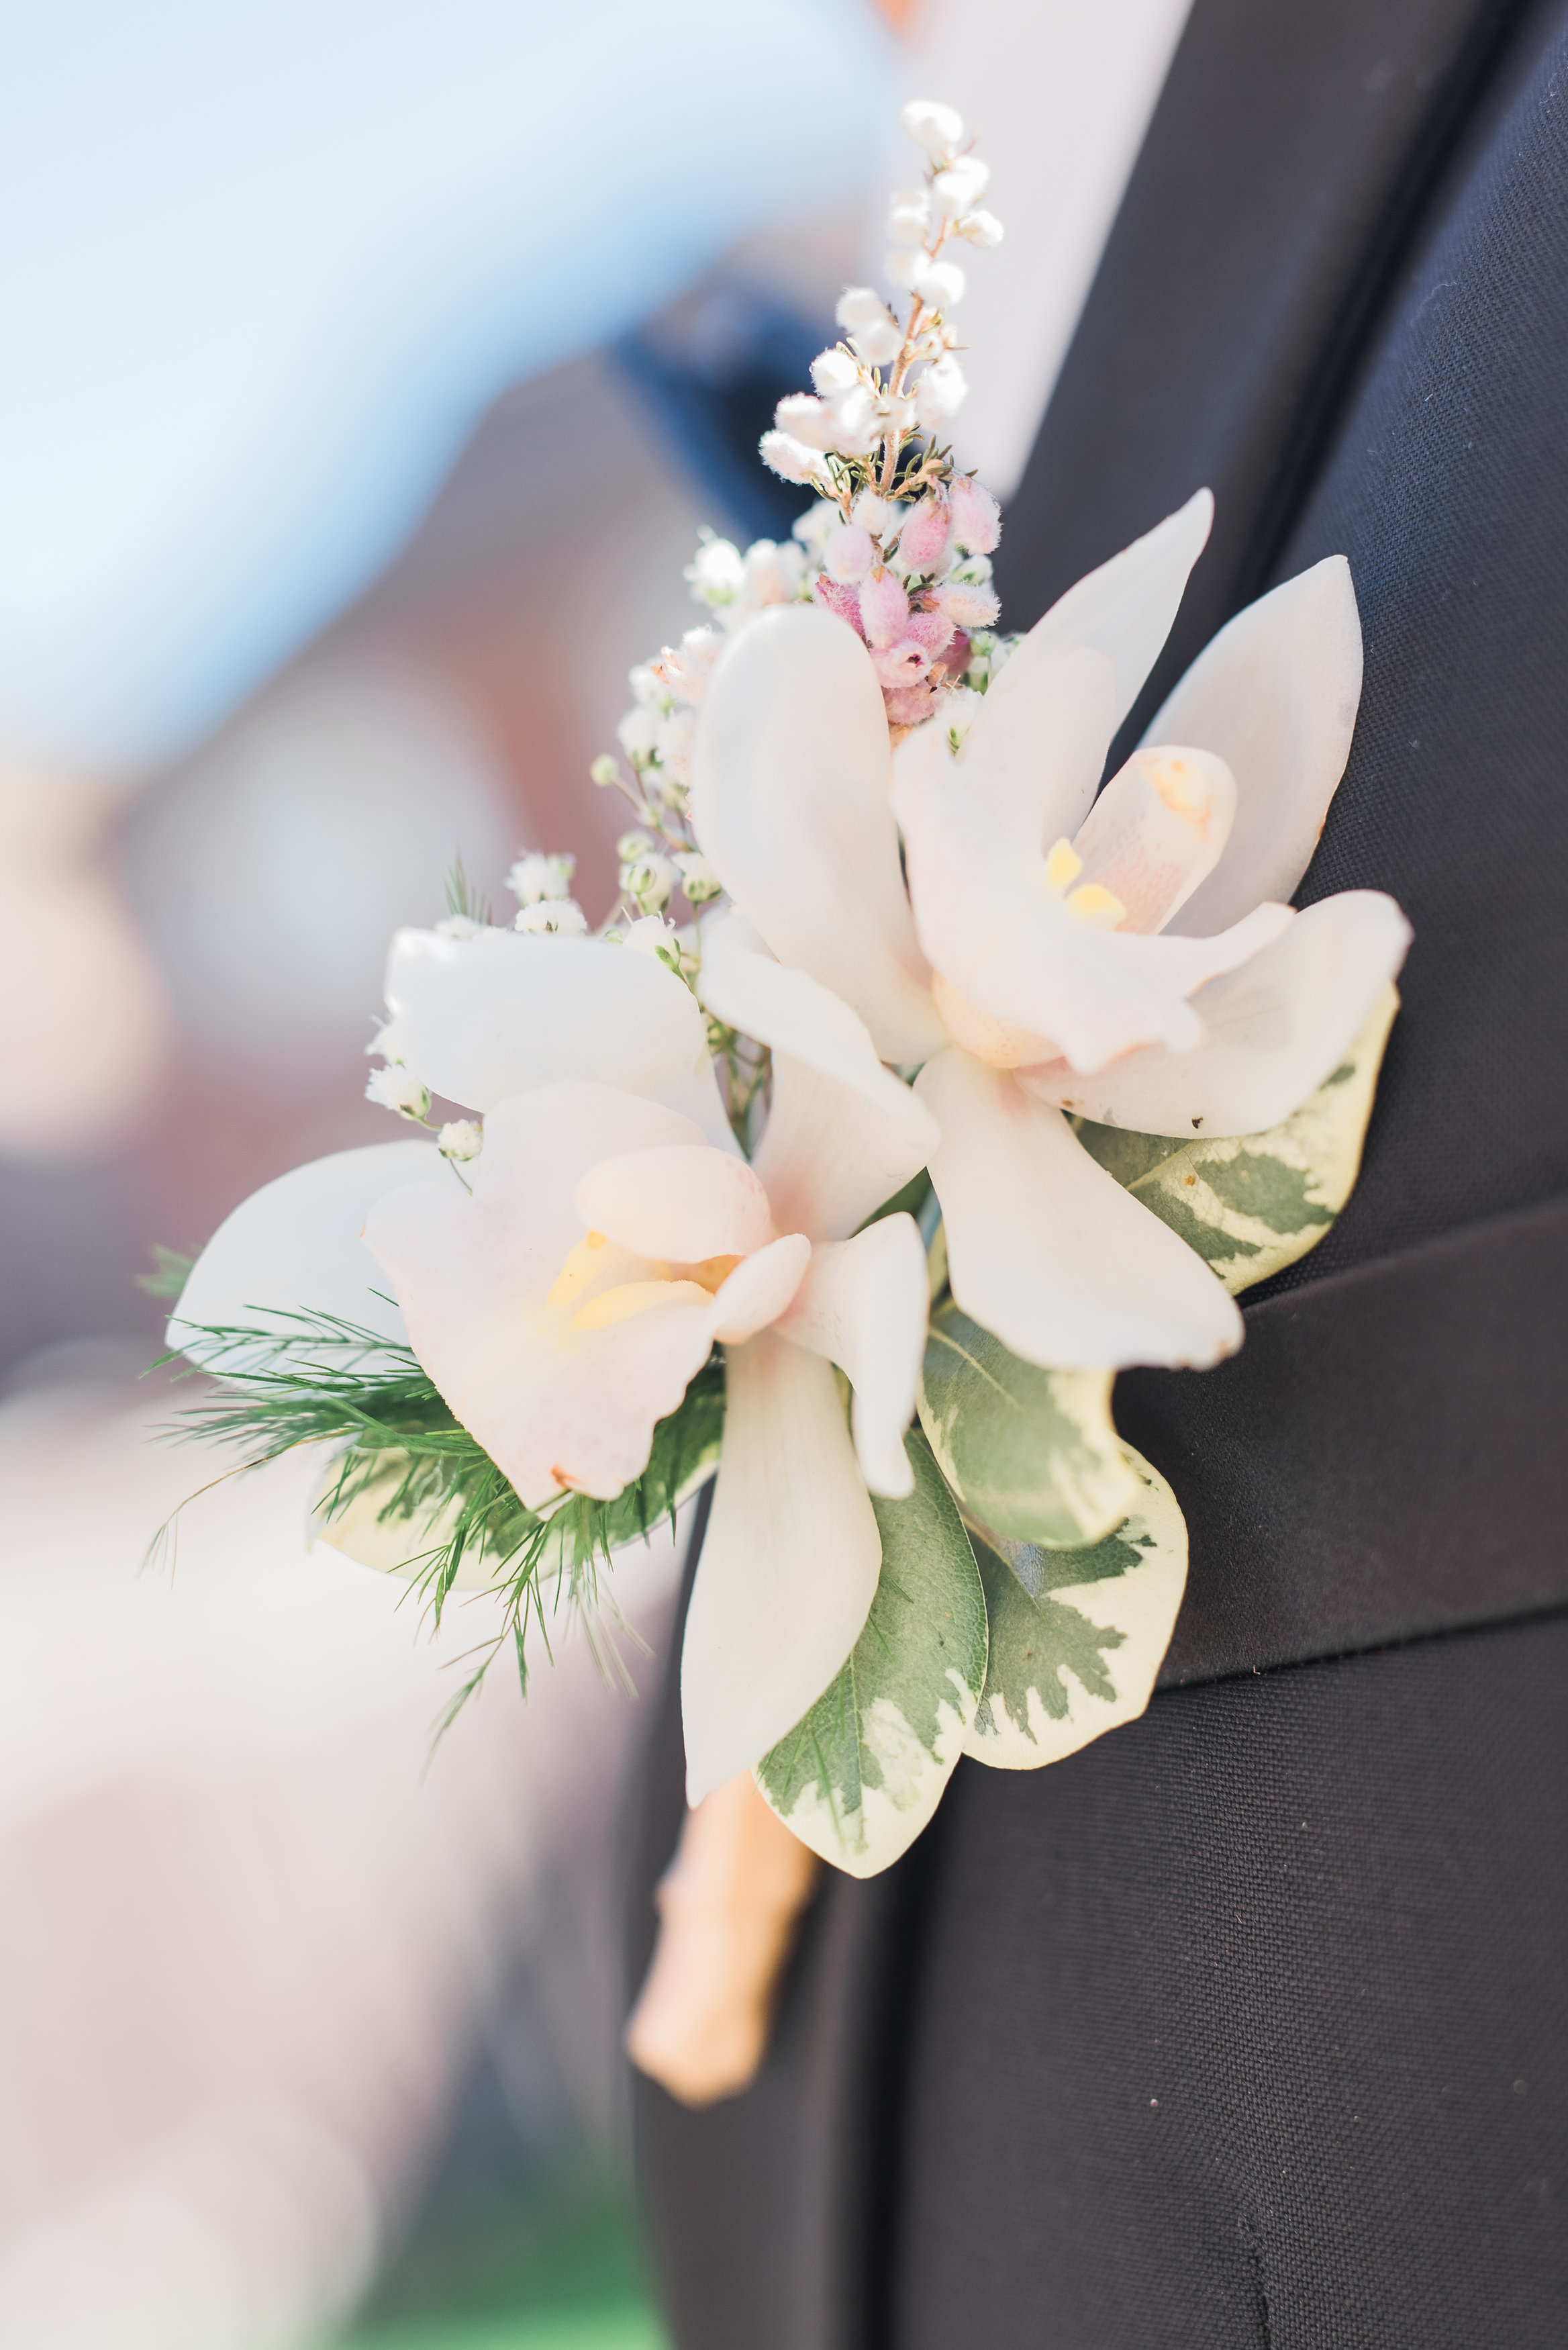 Groom boutonniere with white cymbidium orchids and pink heather flower. Toronto wedding flowers by Secrets Floral.